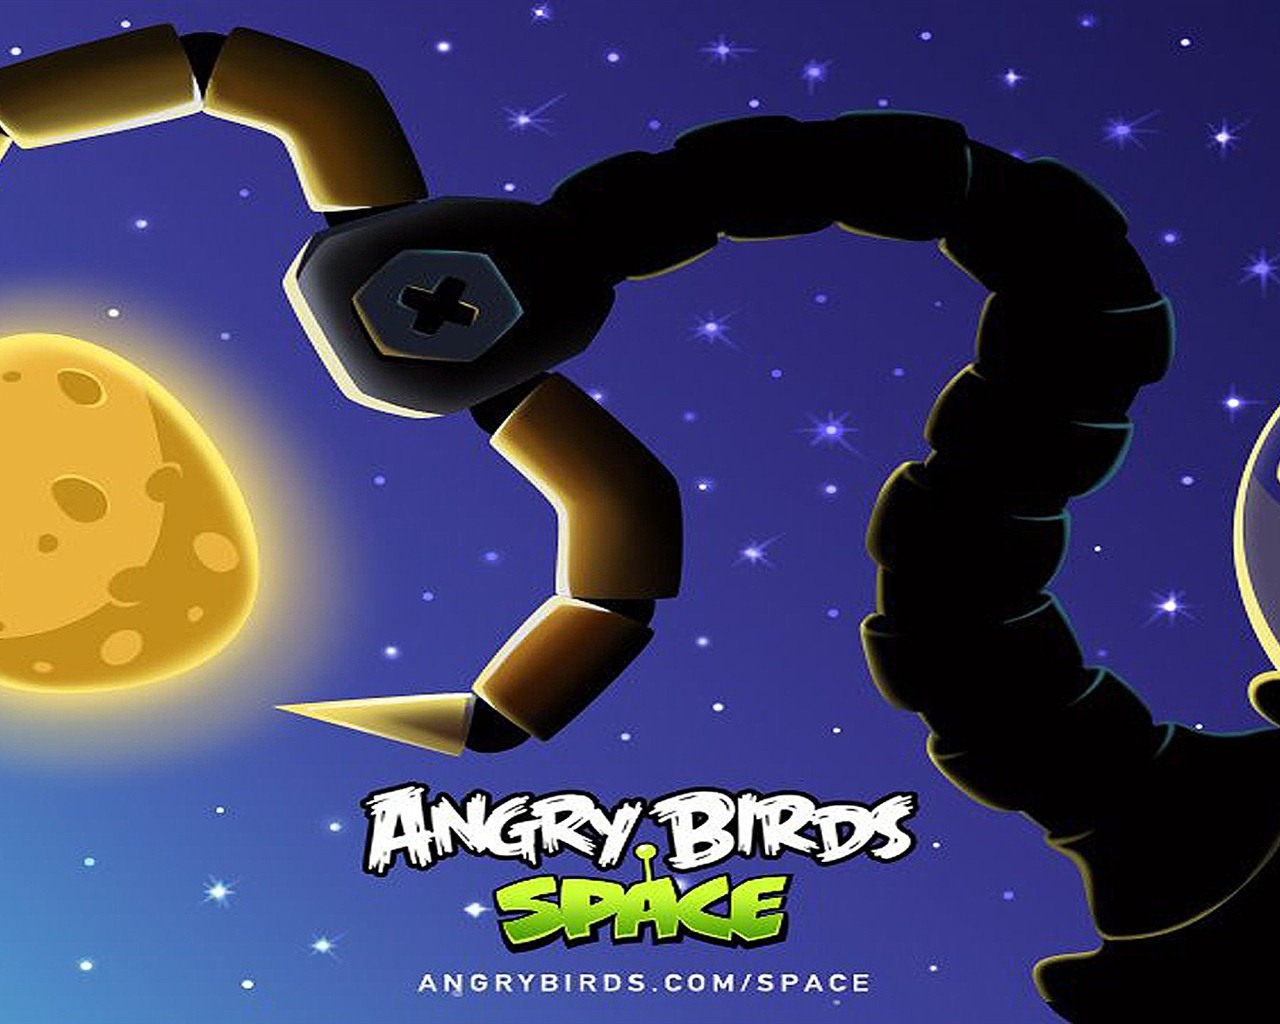 Angry Birds Game Wallpapers #24 - 1280x1024